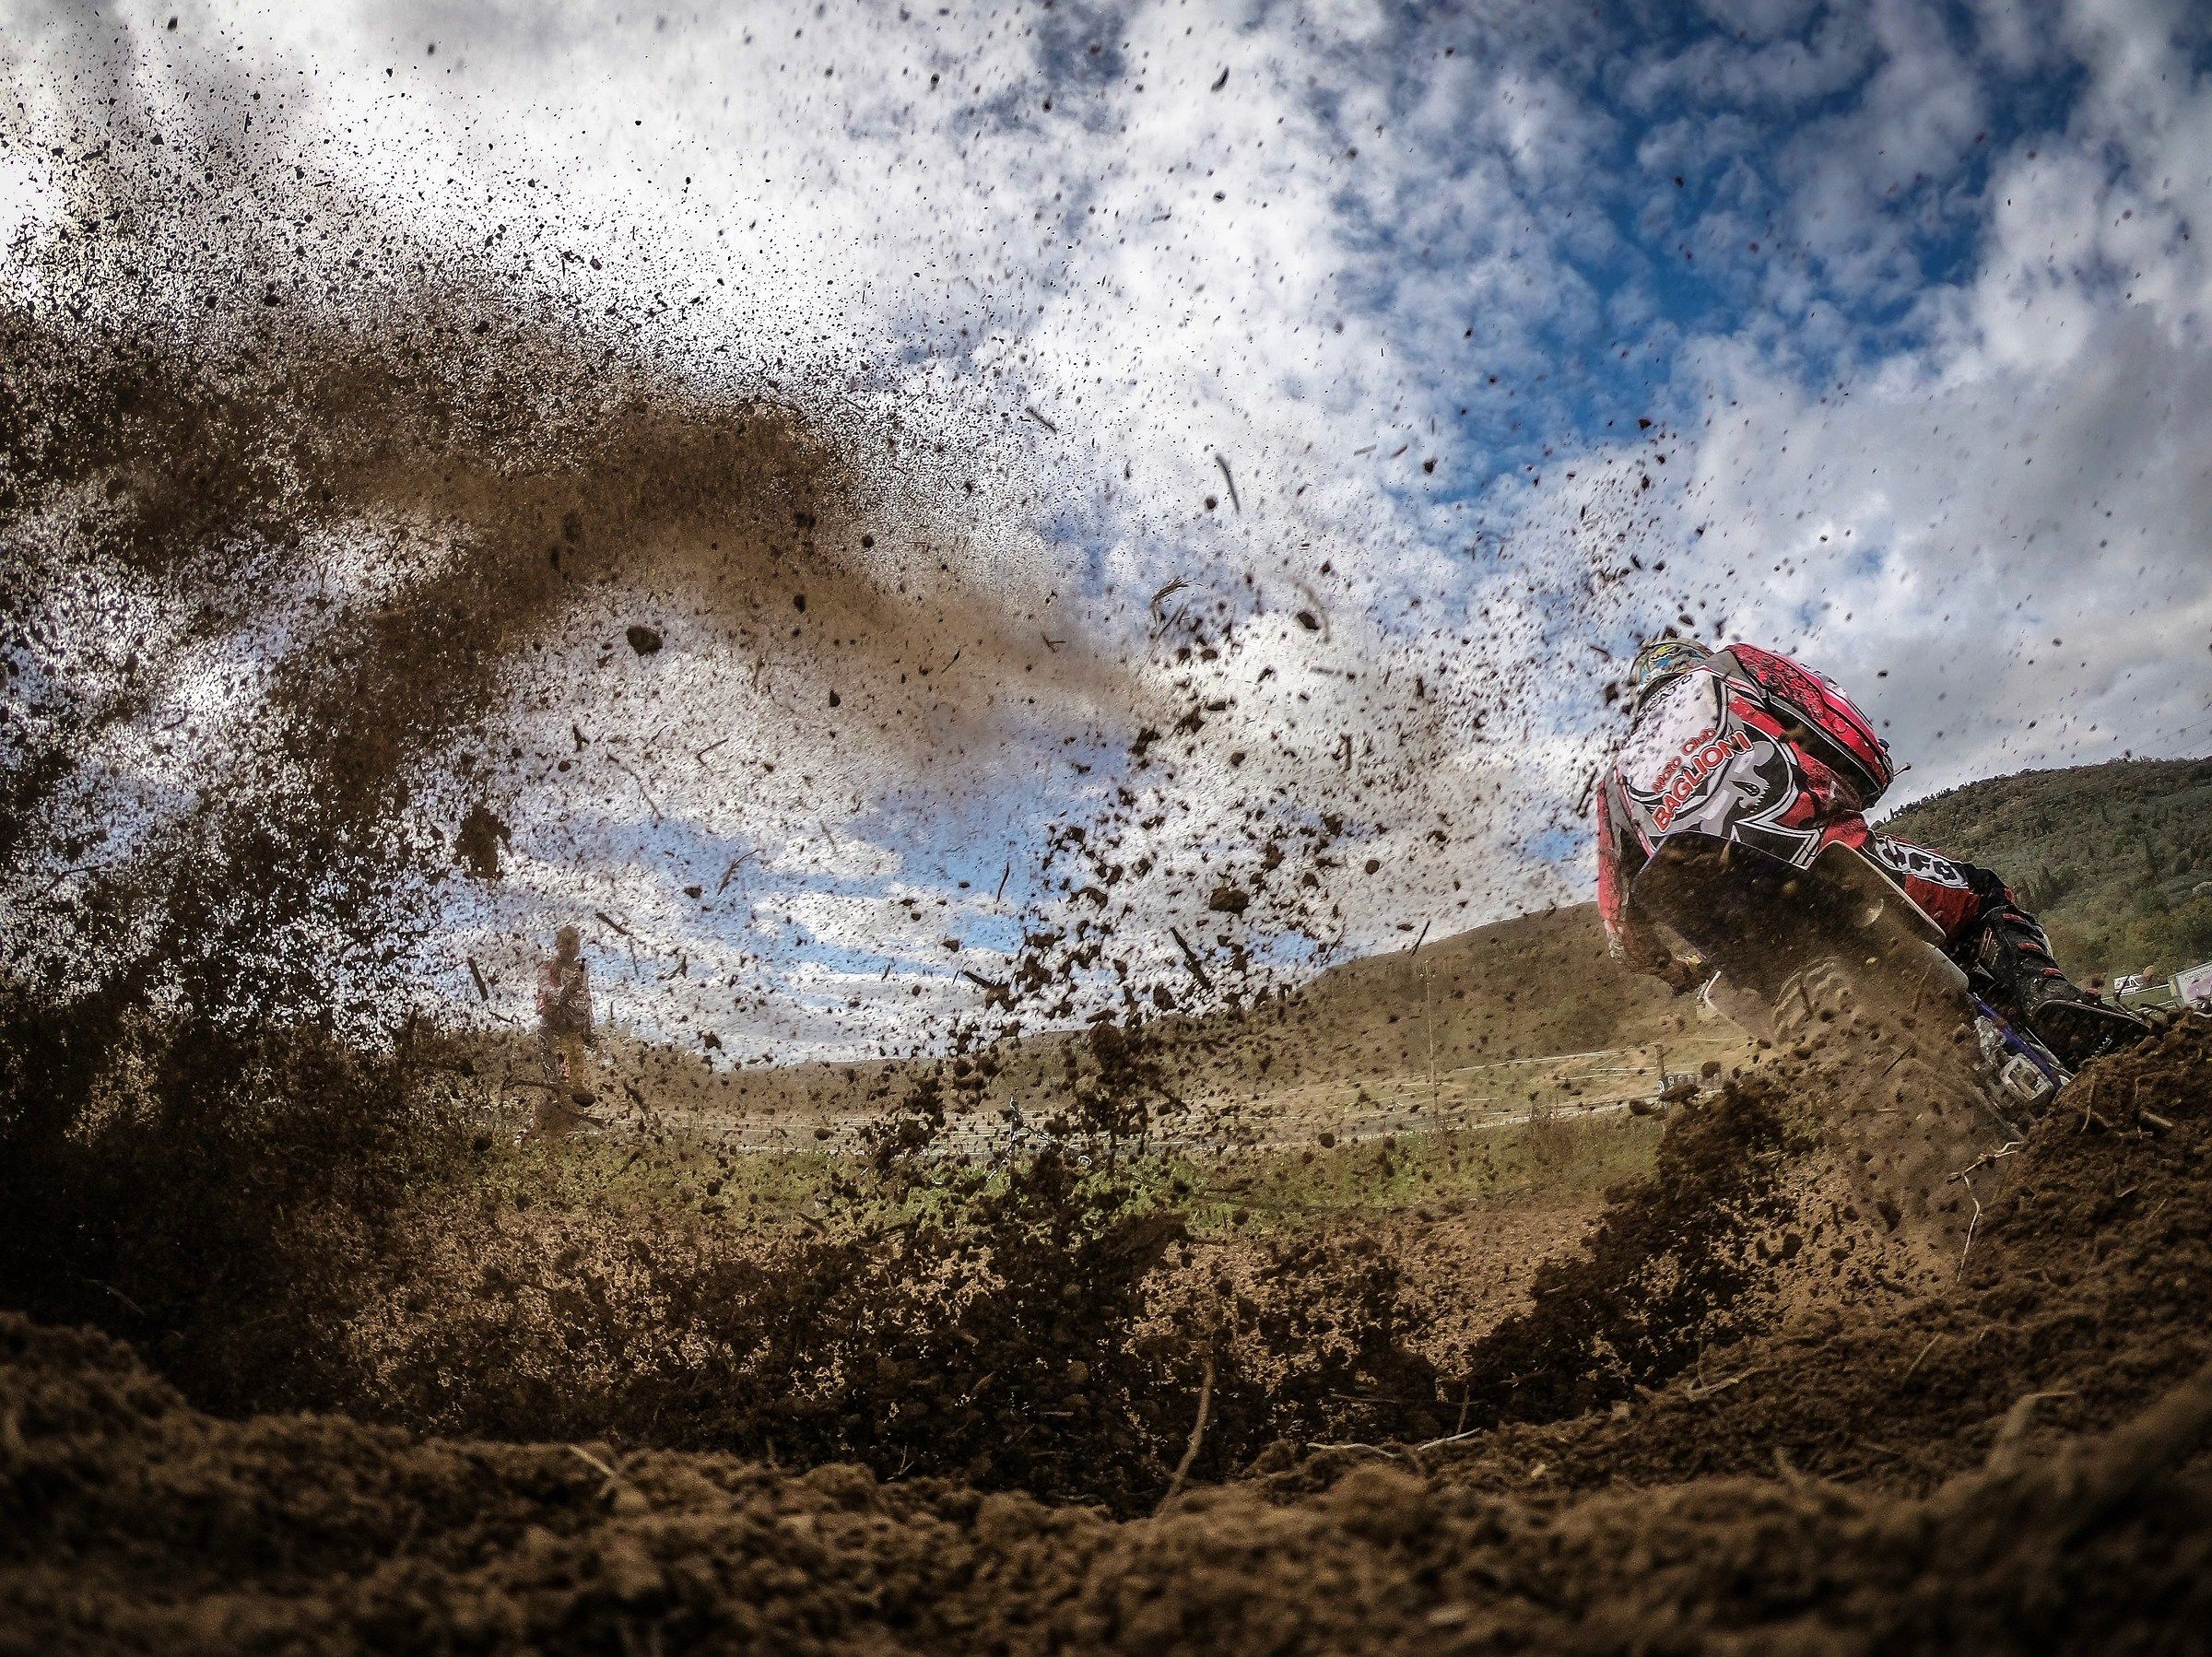 Enduro in action...